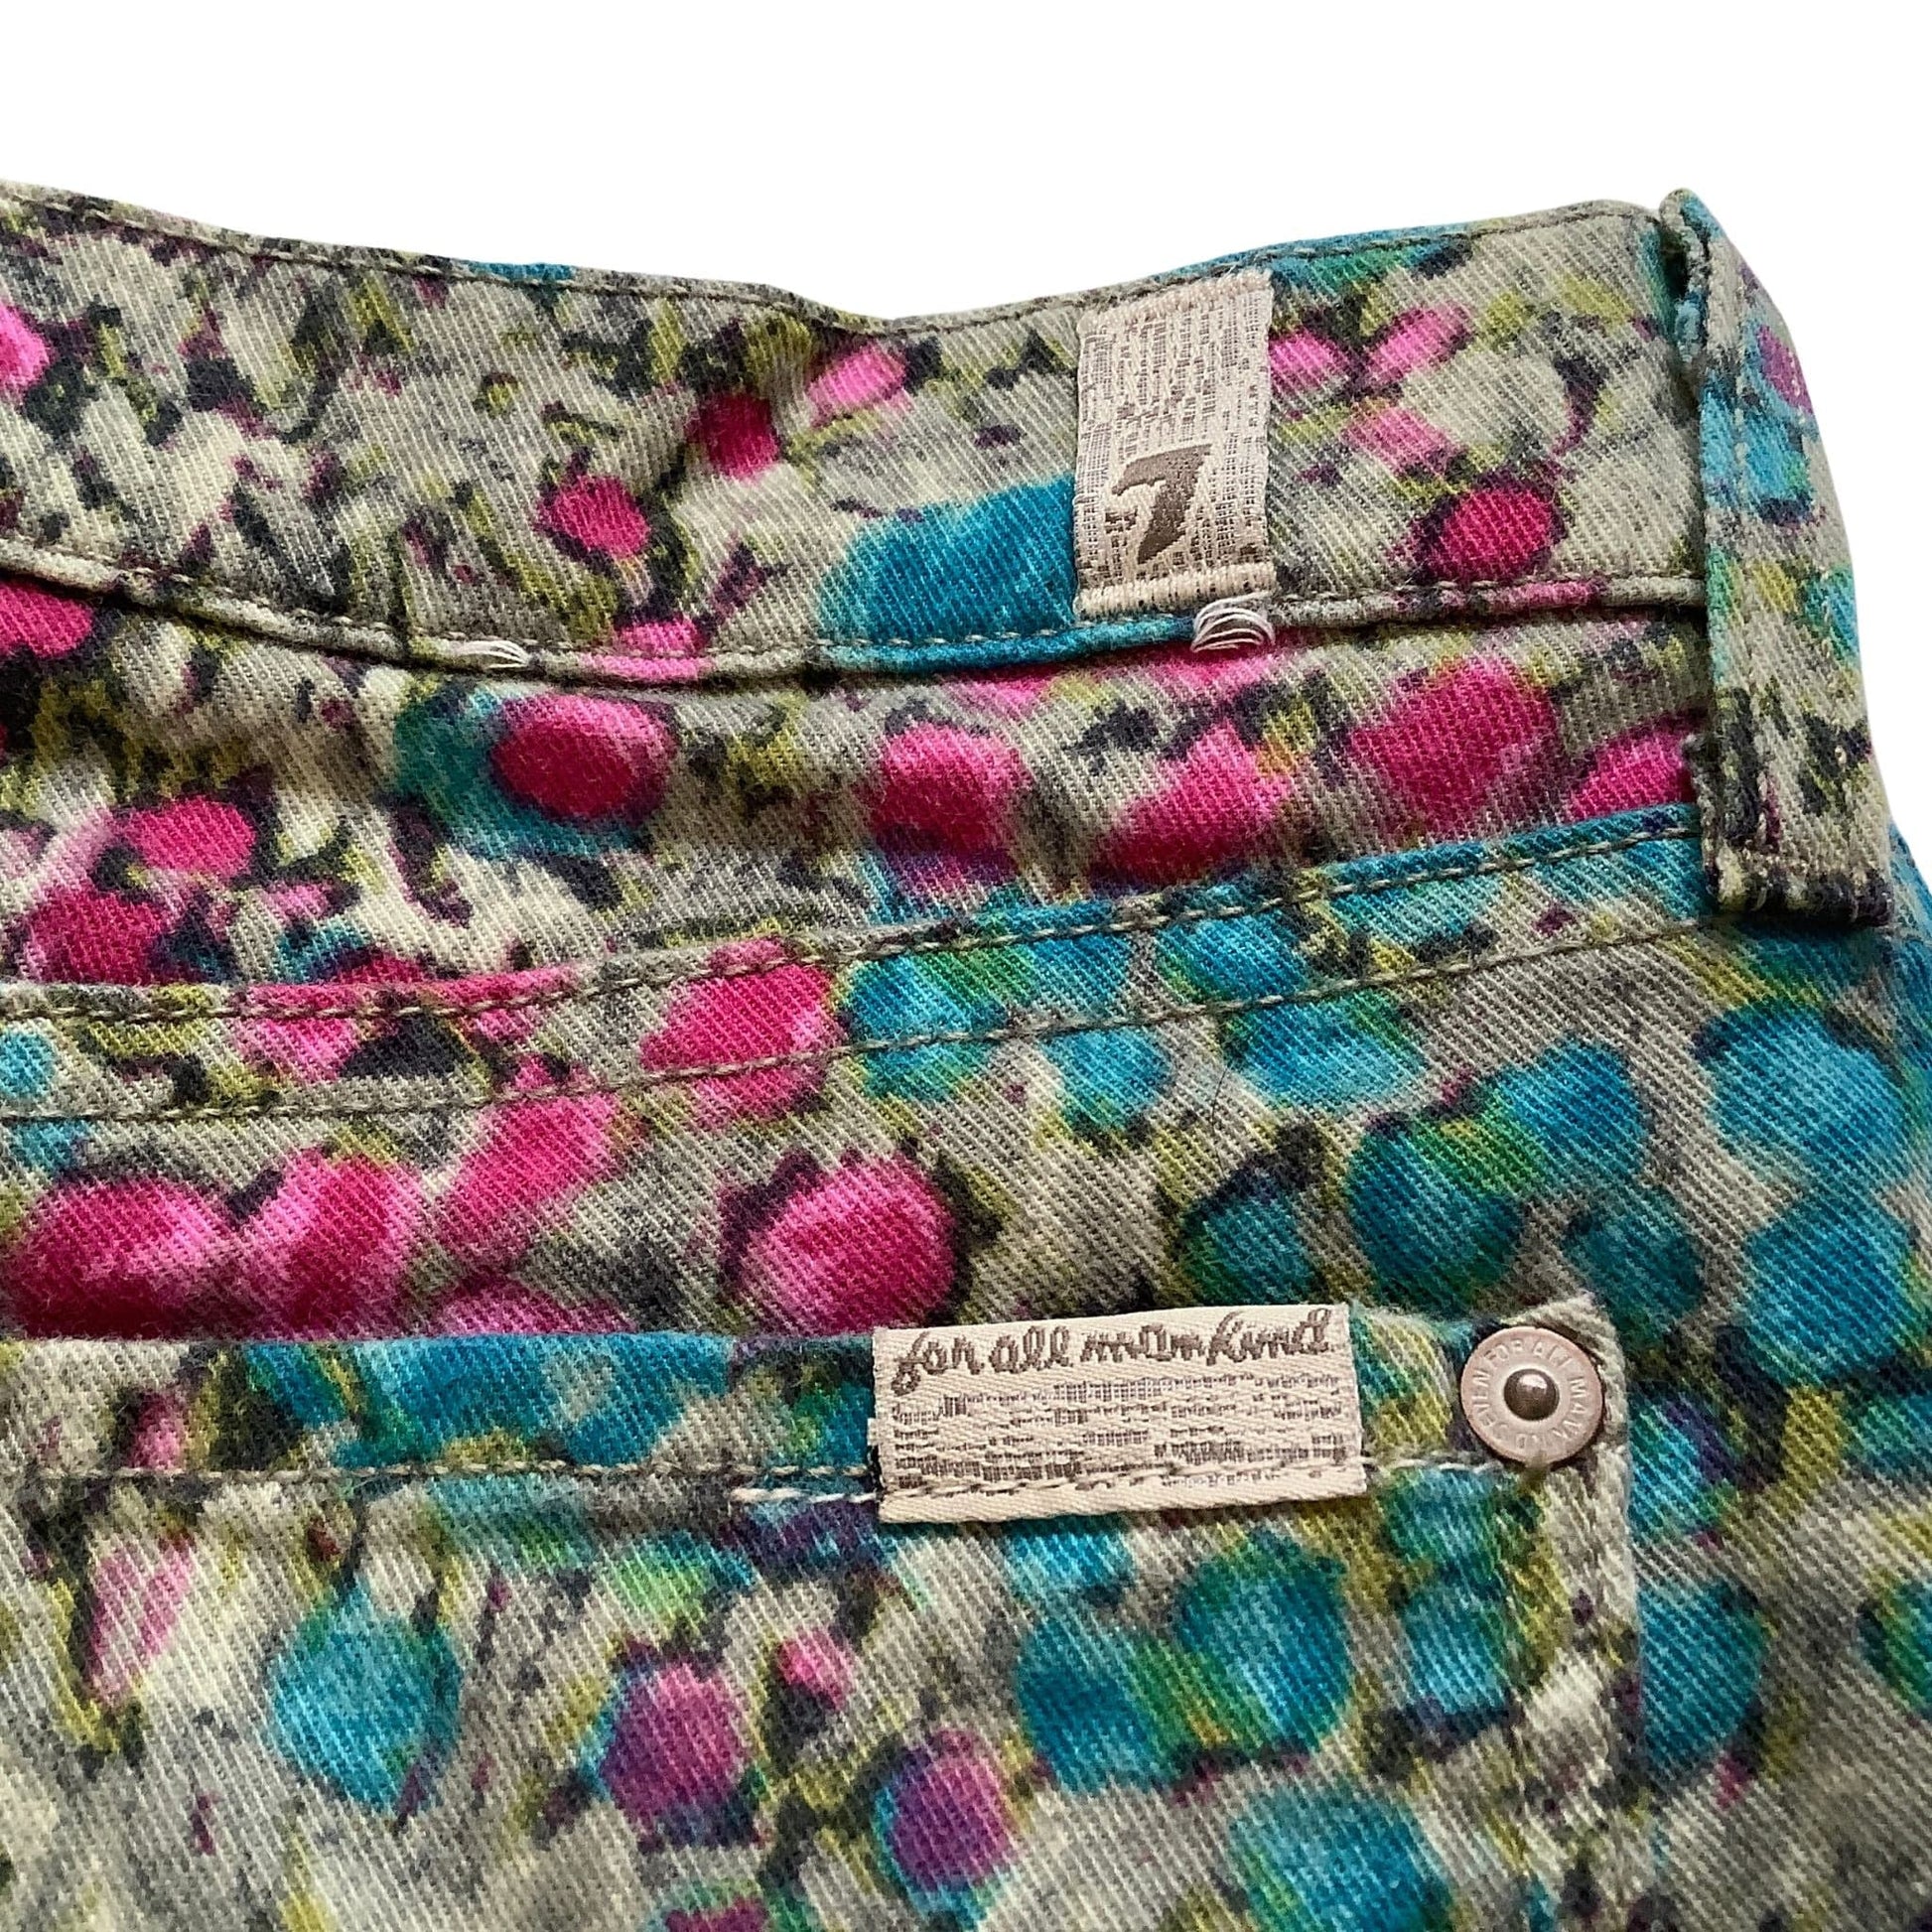 Floral Low Rise Jeans Small / Multi / Y2K - Now